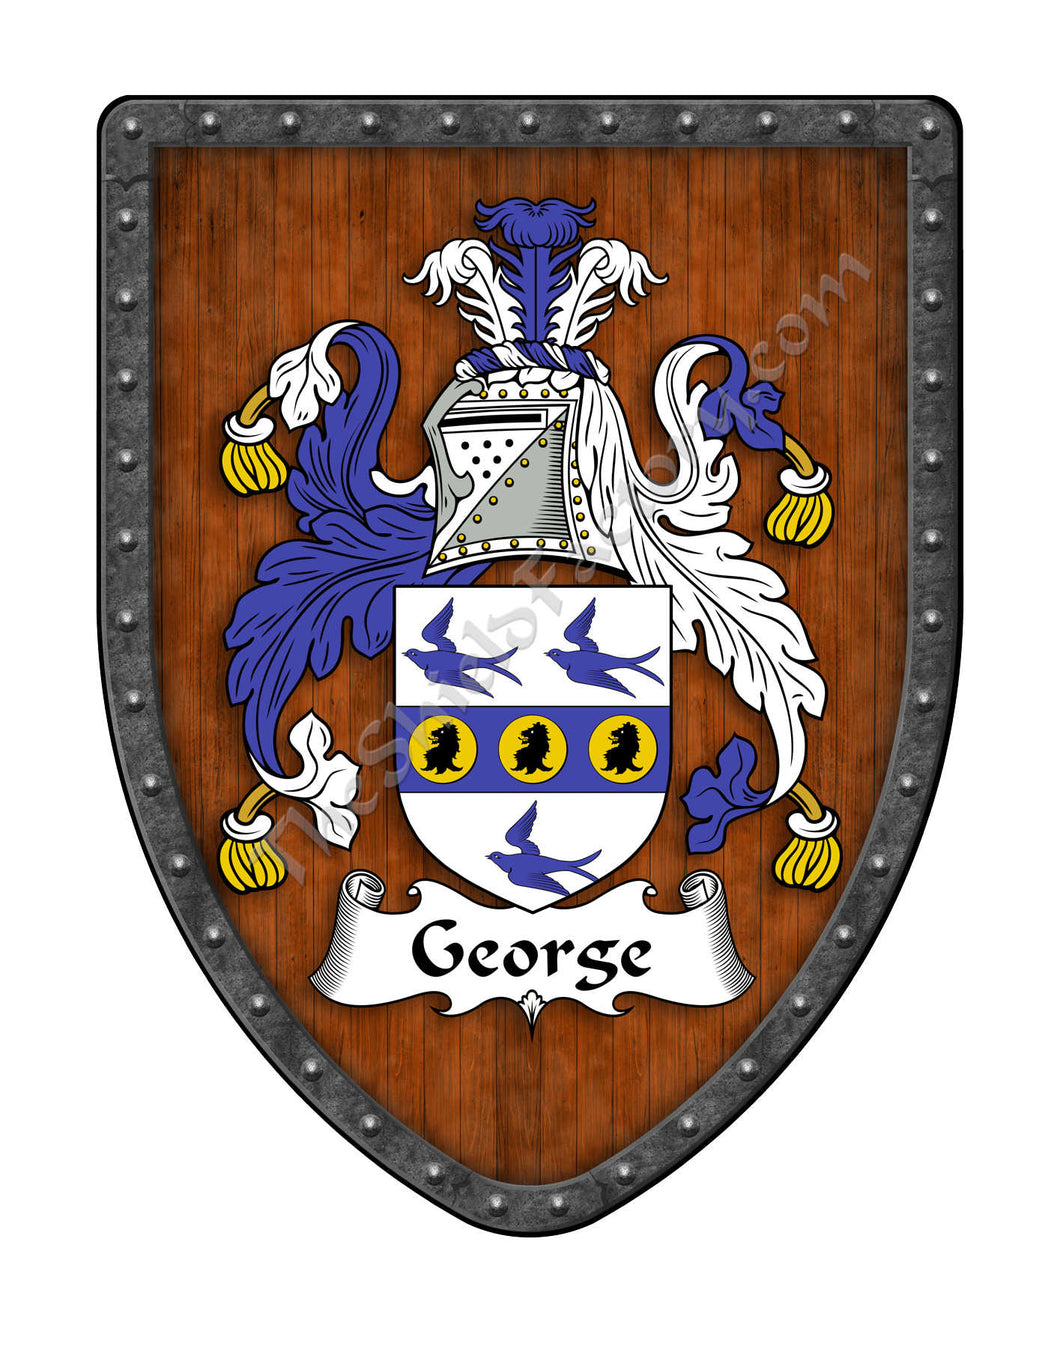 George Coat of Arms Shield